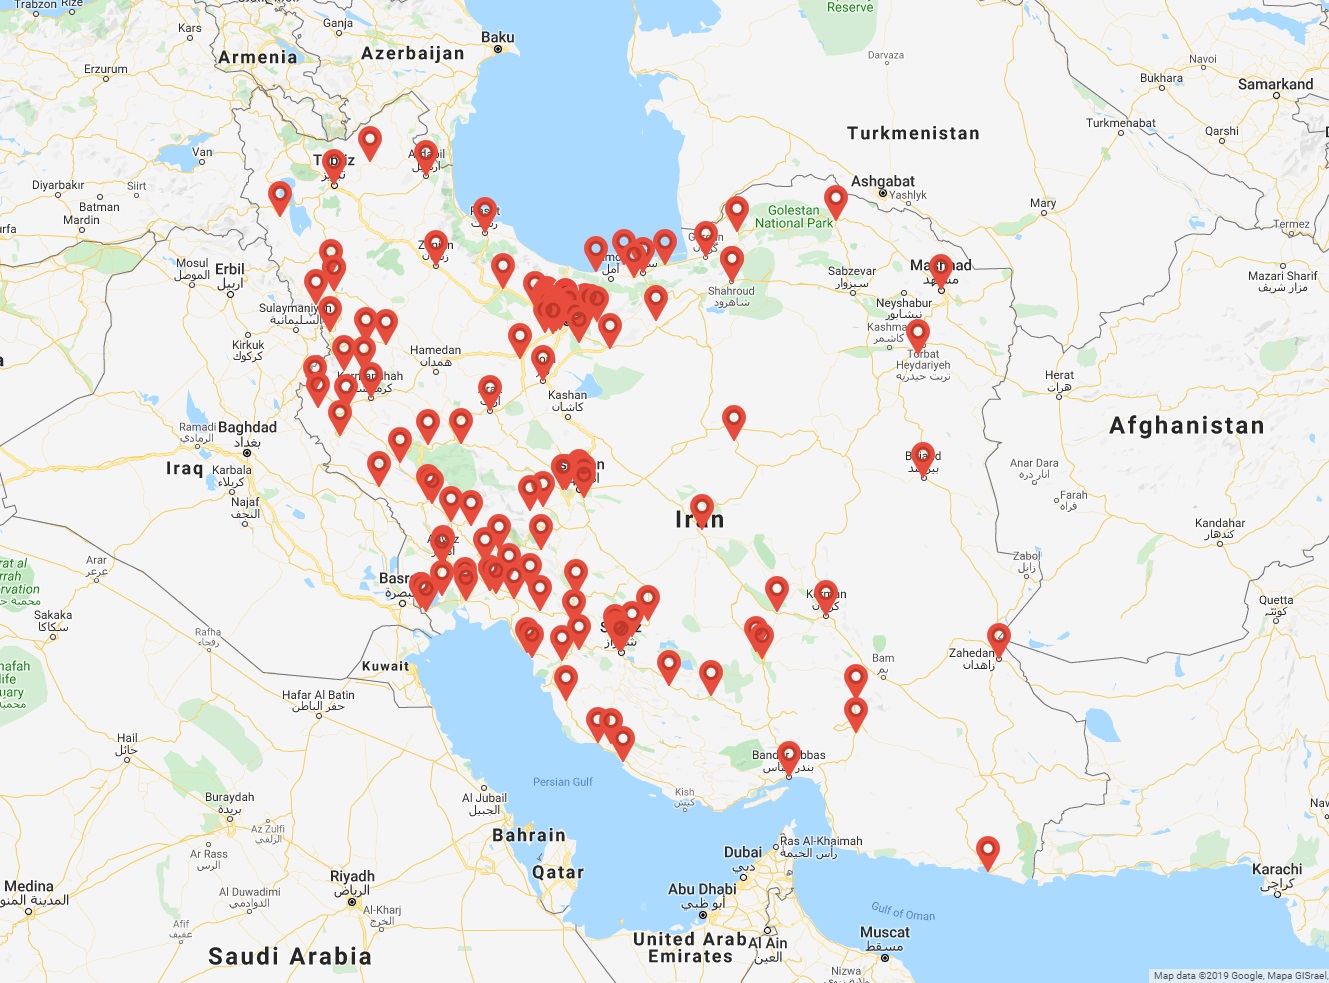 Iran Protests November 2019 Cities and Provinces